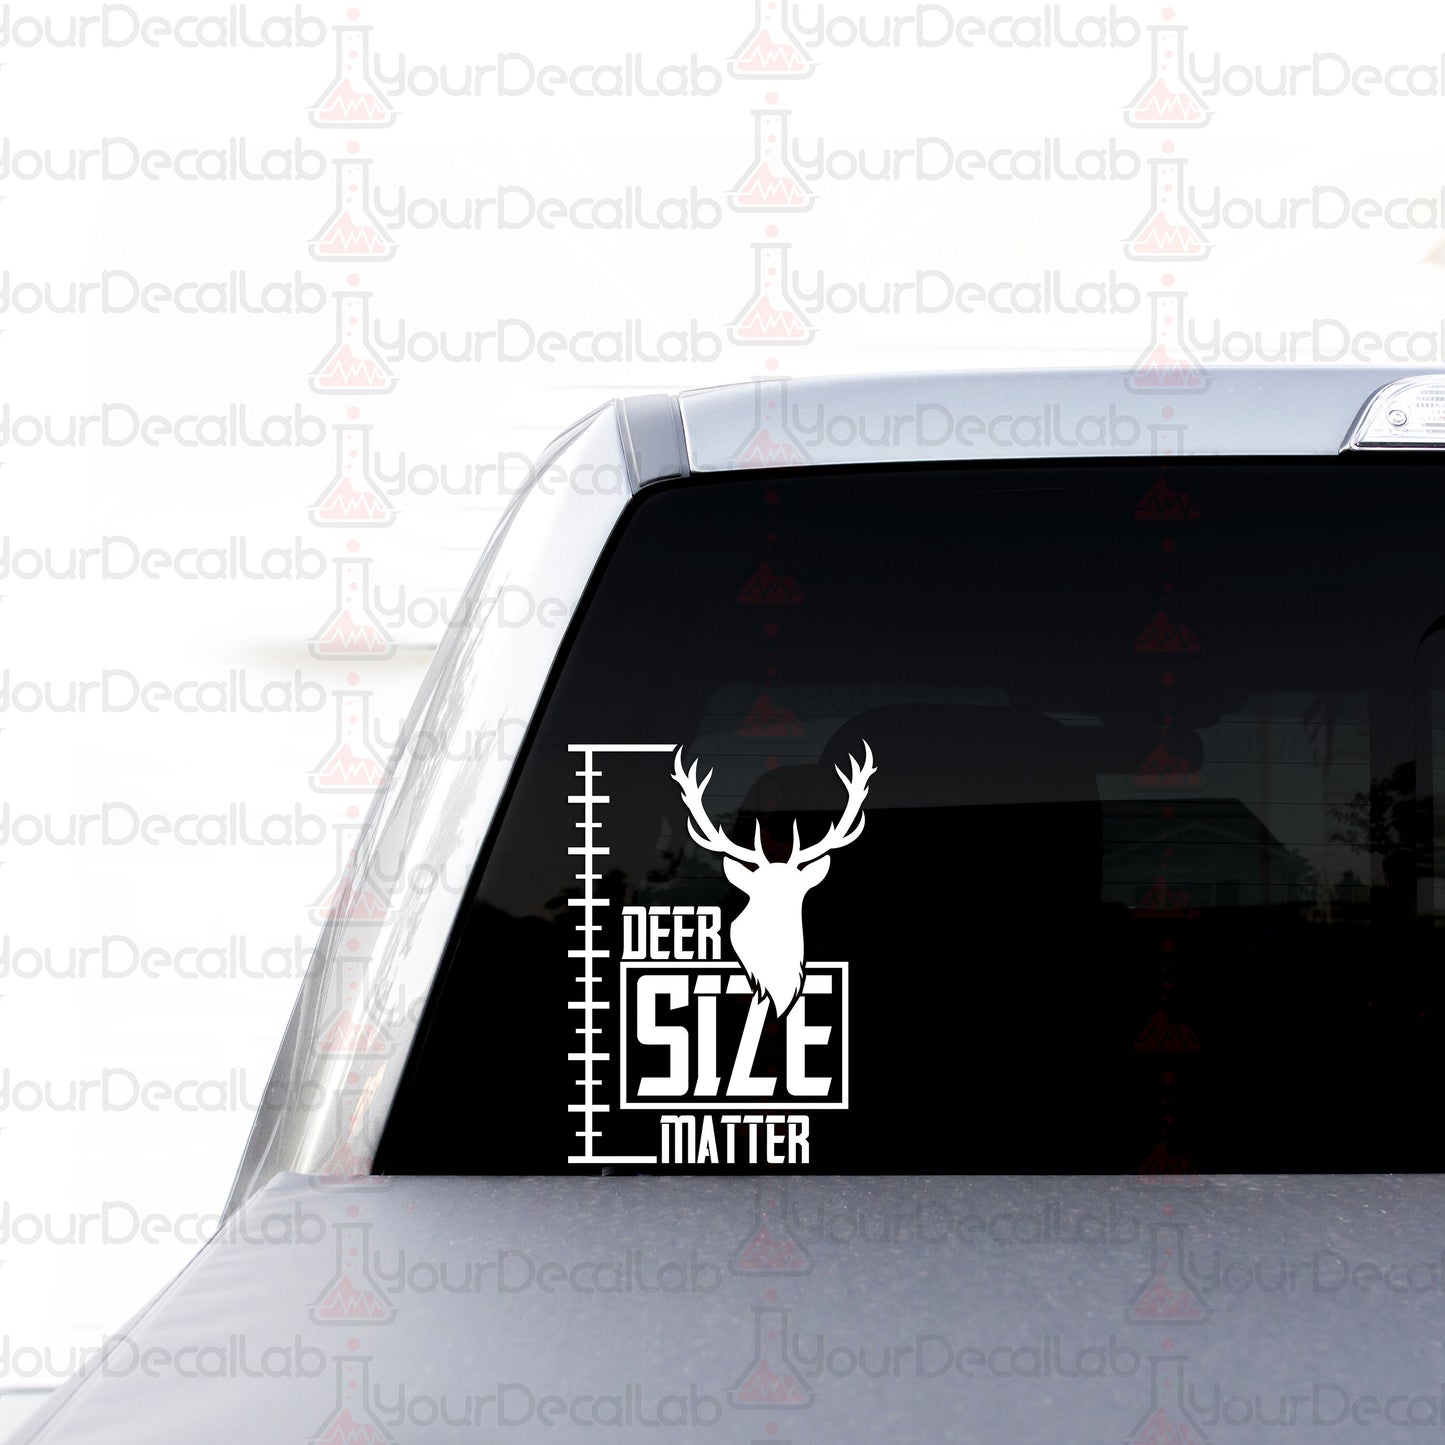 deer size matters sticker on the back of a car